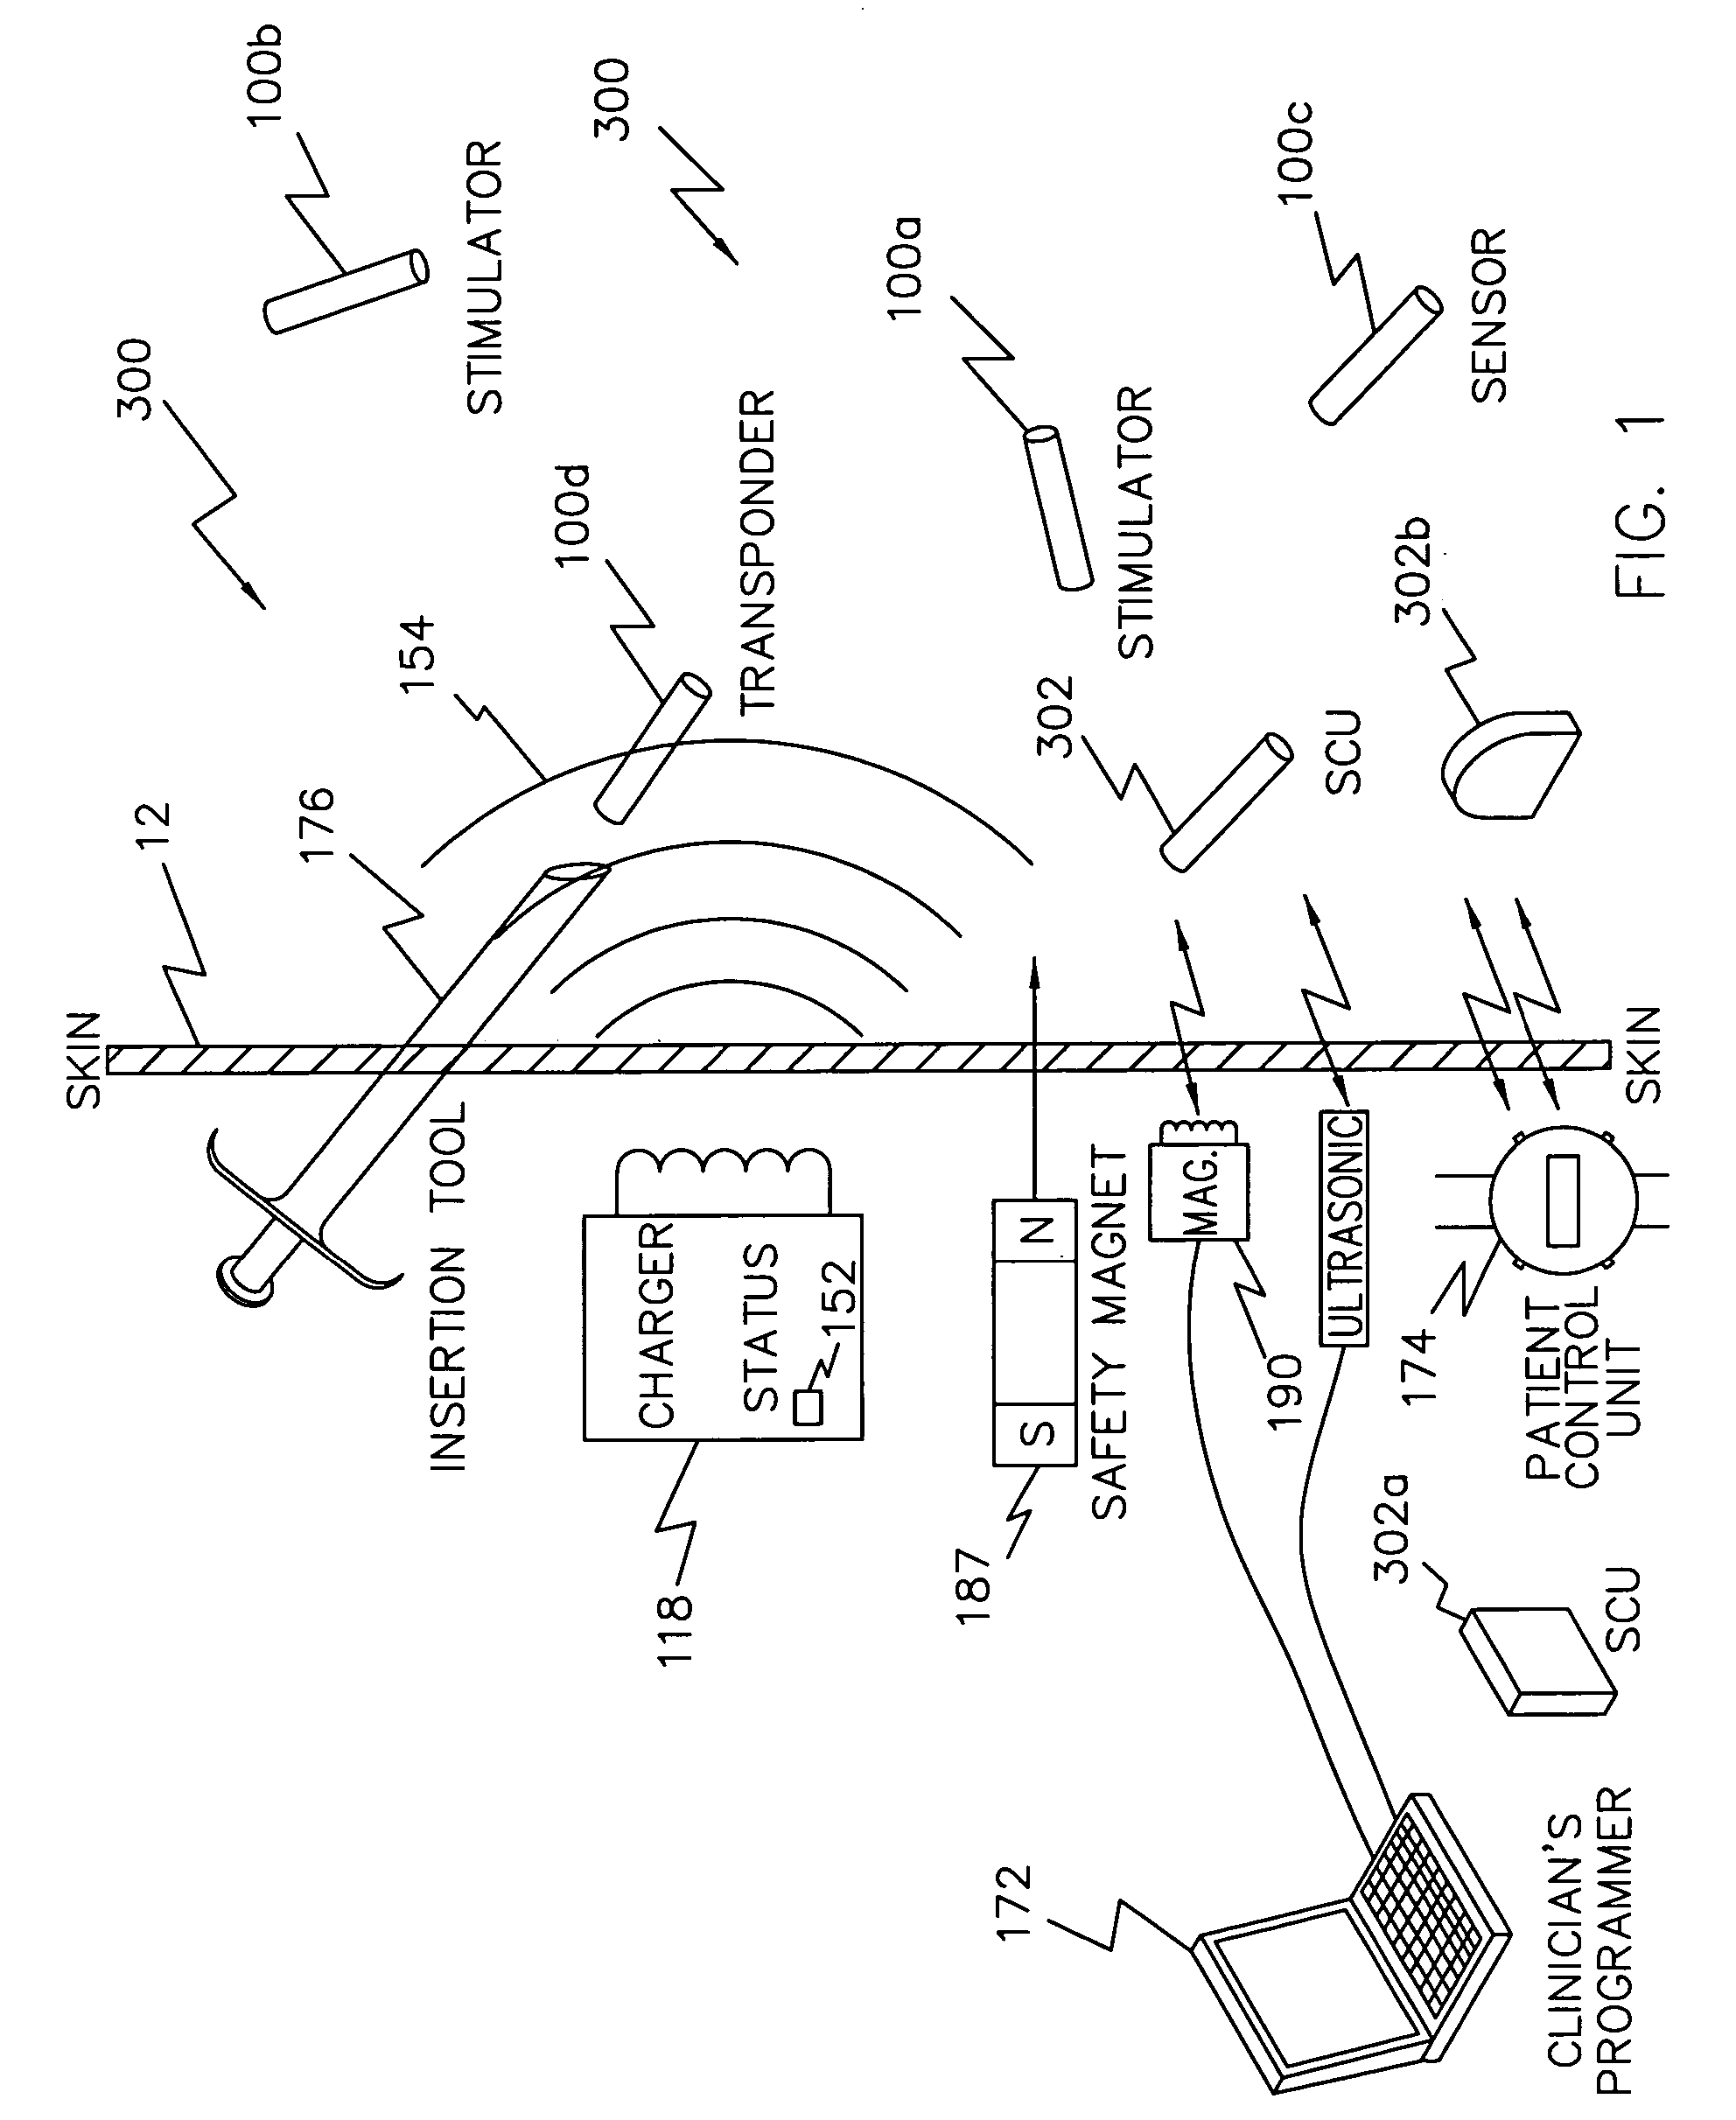 System and method suitable for treatment of a patient with a neurological deficit by sequentially stimulating neural pathways using a system of discrete implantable medical devices